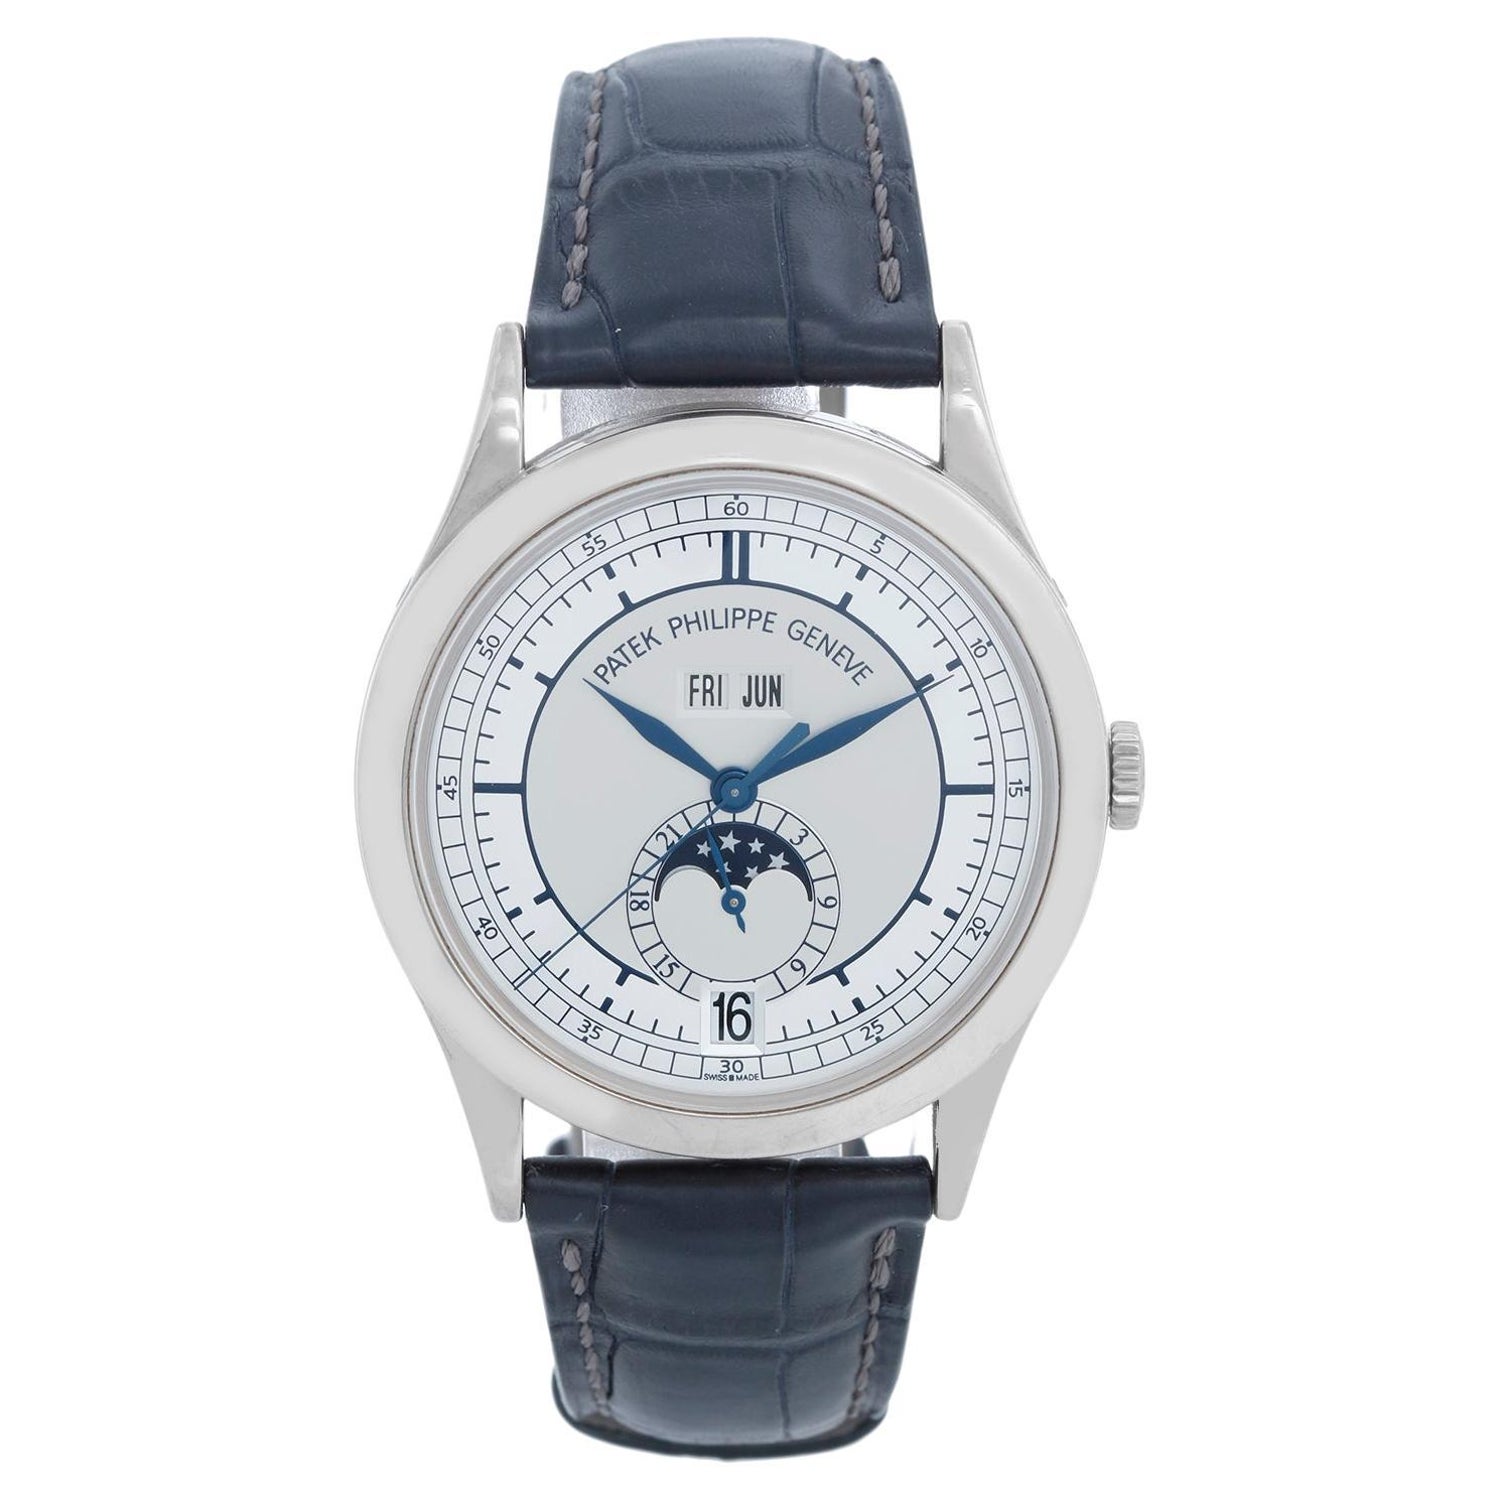 Is the Patek Philippe 'Tiffany' T150 the ultimate retailer-signed watch?